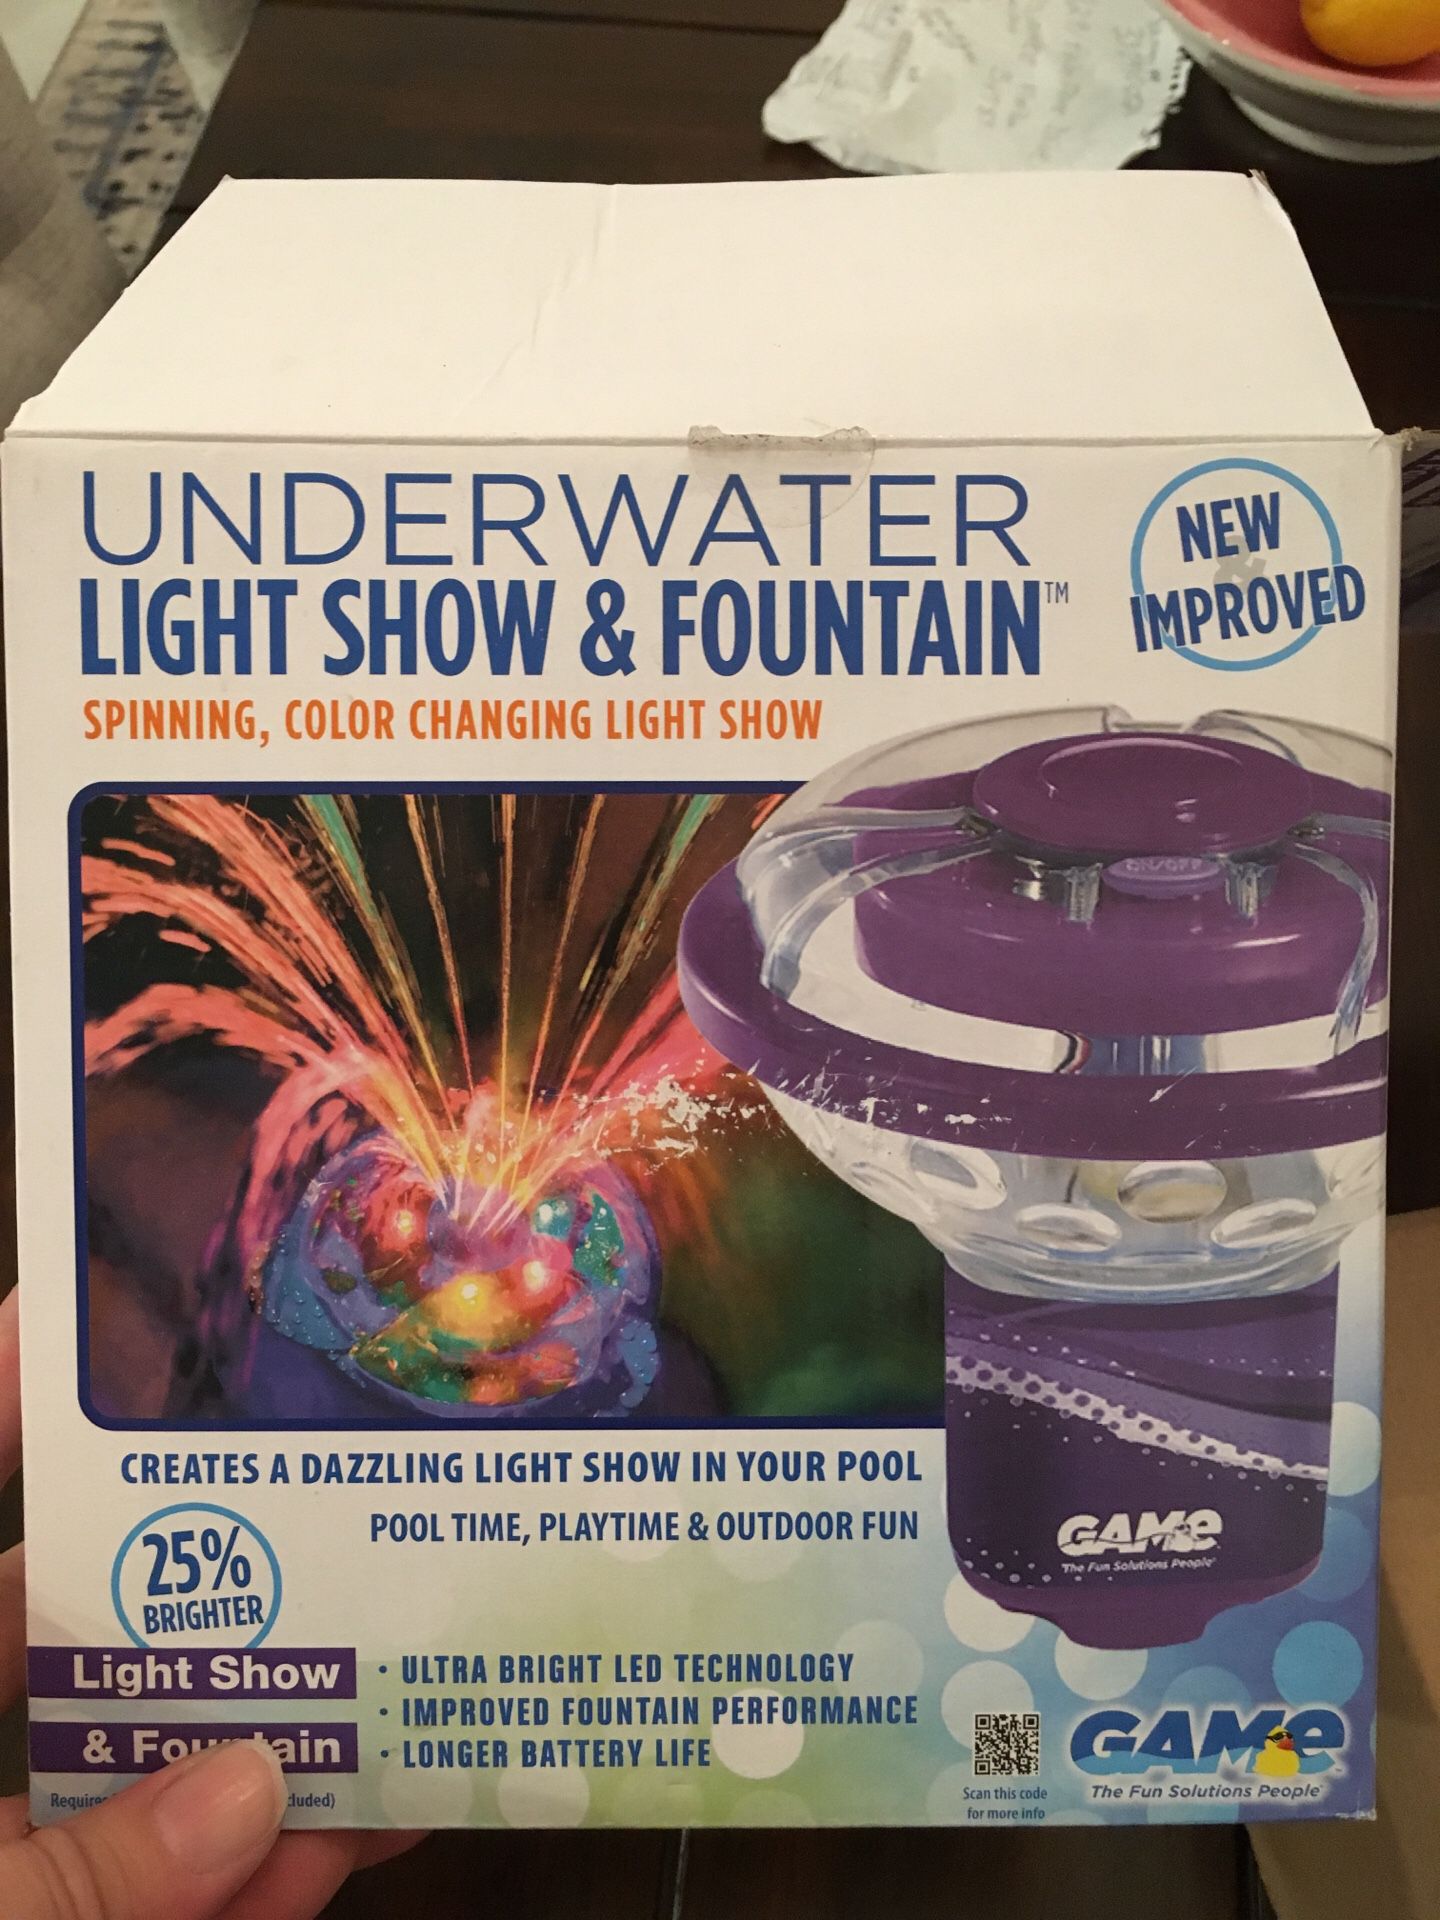 Water fountain light show underwater spinning color changing light show for your pool